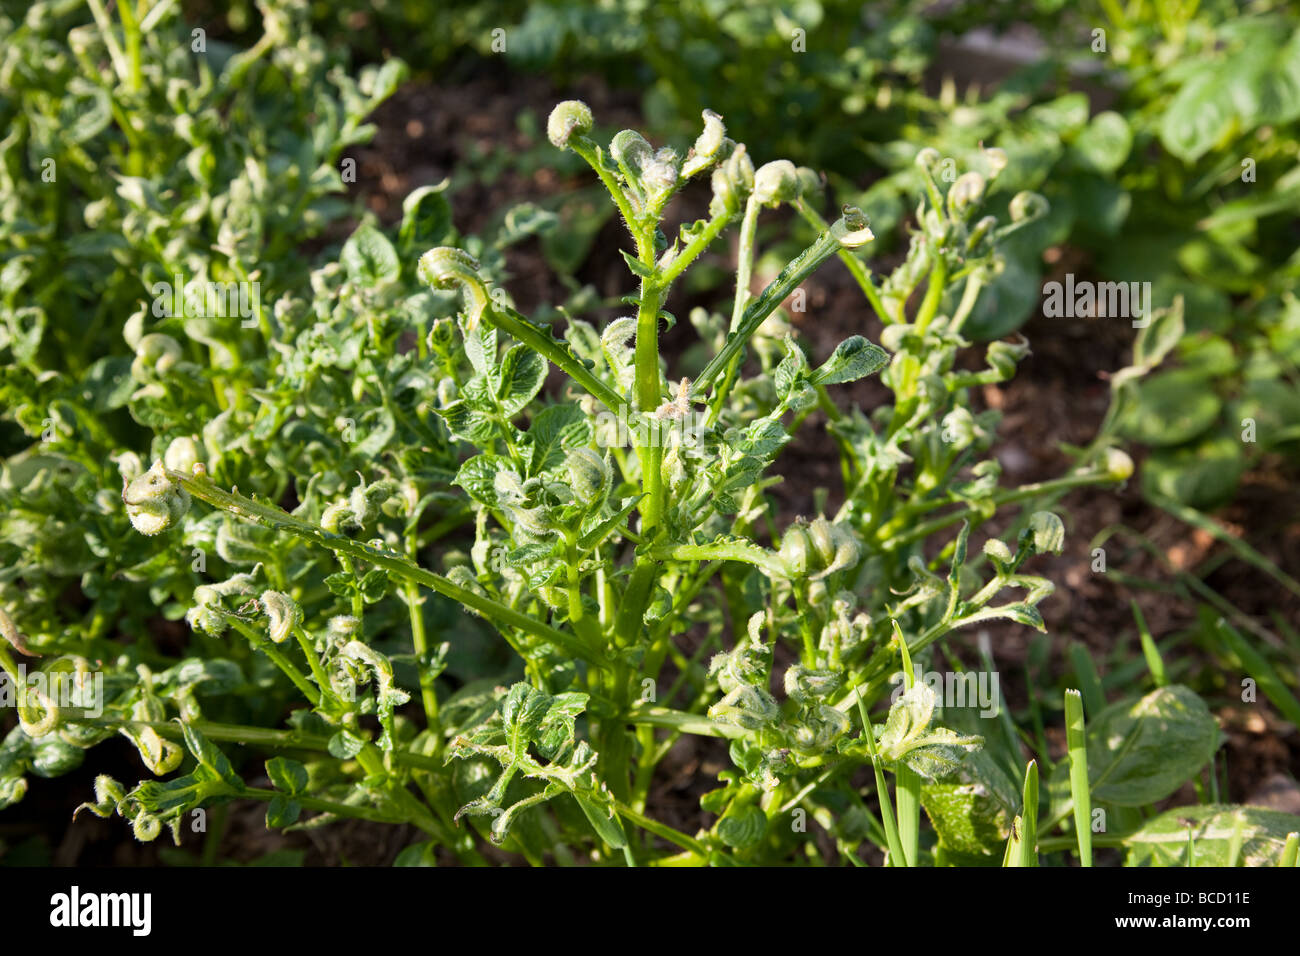 Young potato plants damaged by growing in manure contaminated with weedkiller Aminopyralid Stock Photo